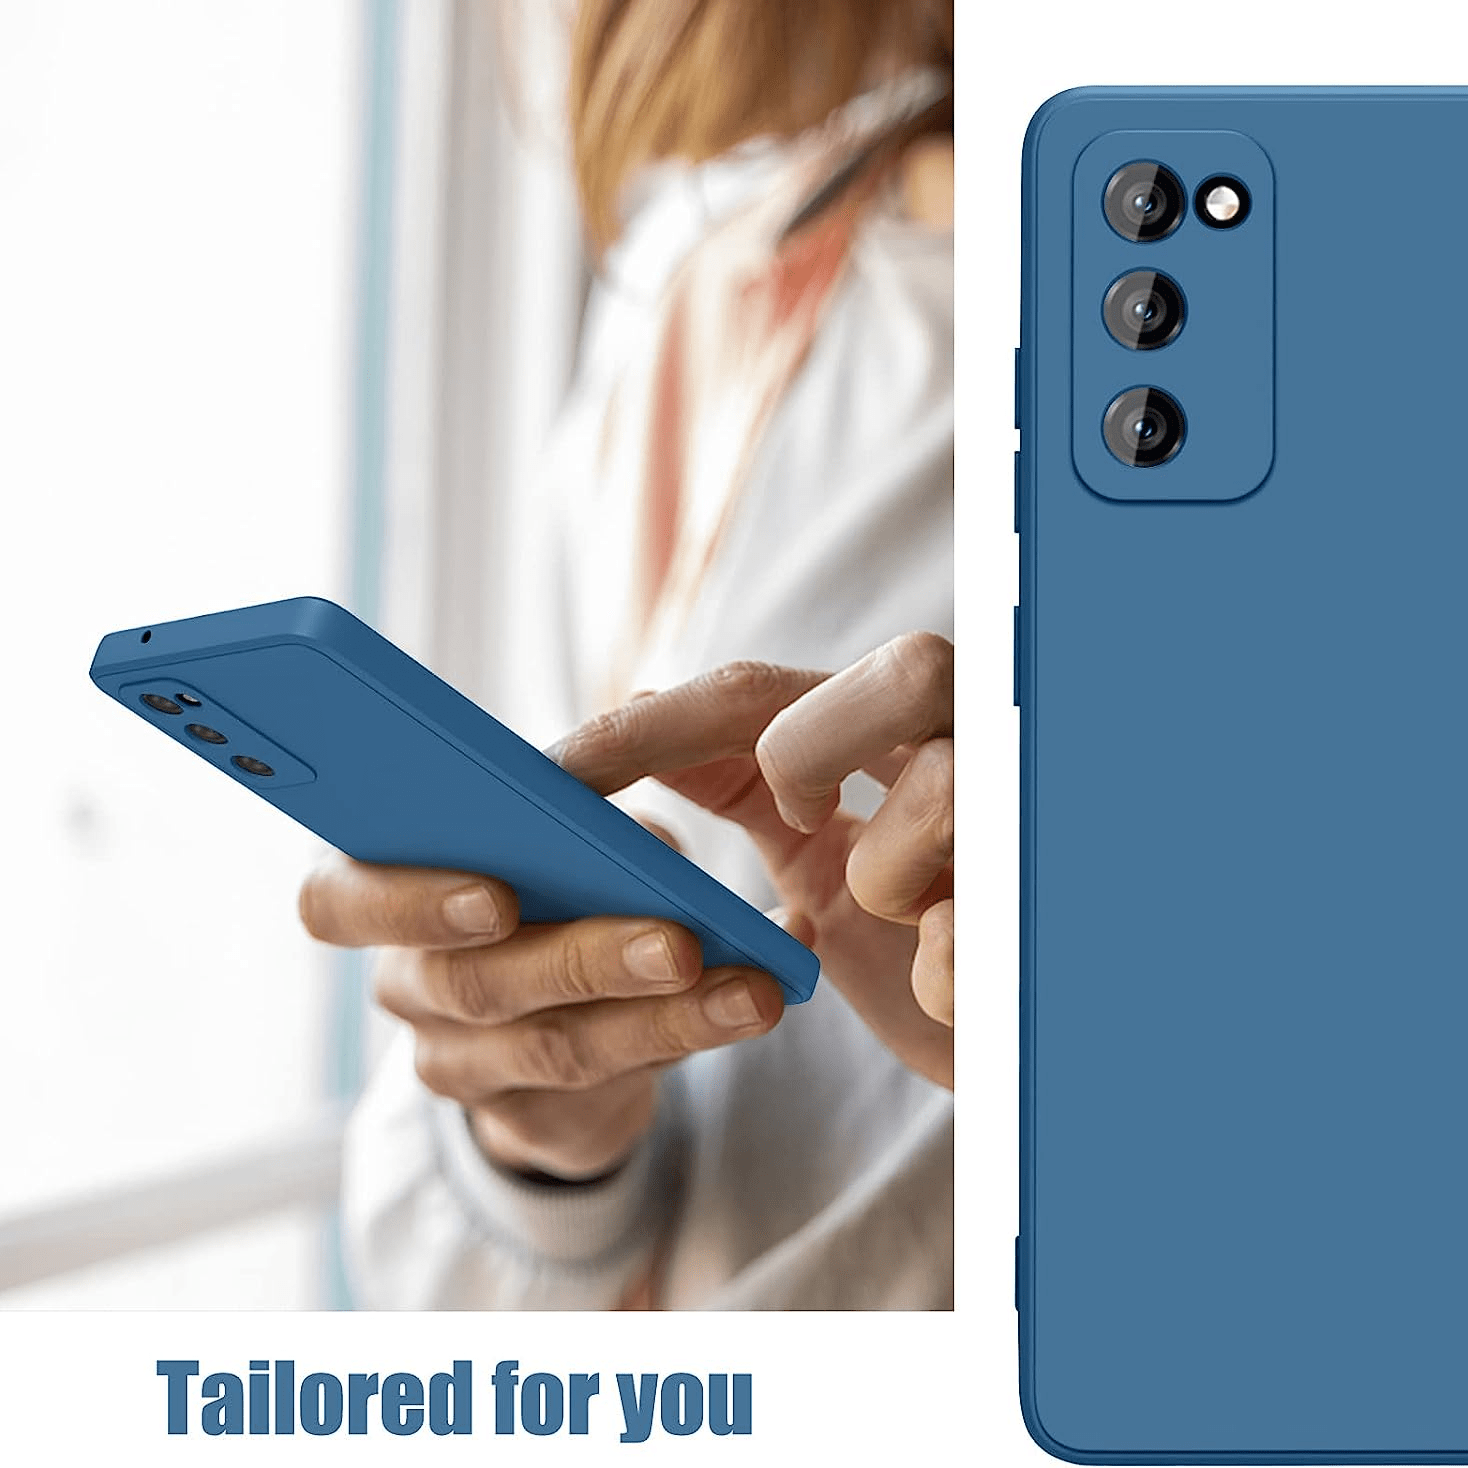 Full Cover Case for Samsung Galaxy S20 Plus Ultra FE Silicone